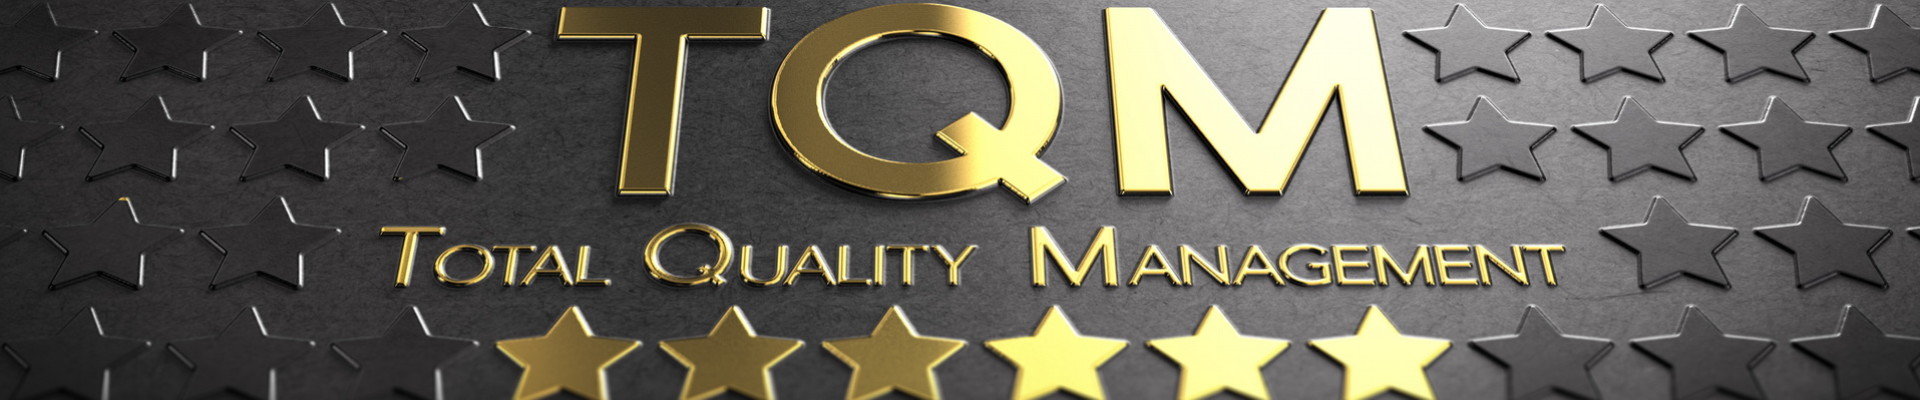 Accronym TQM and the text Total Quality Management